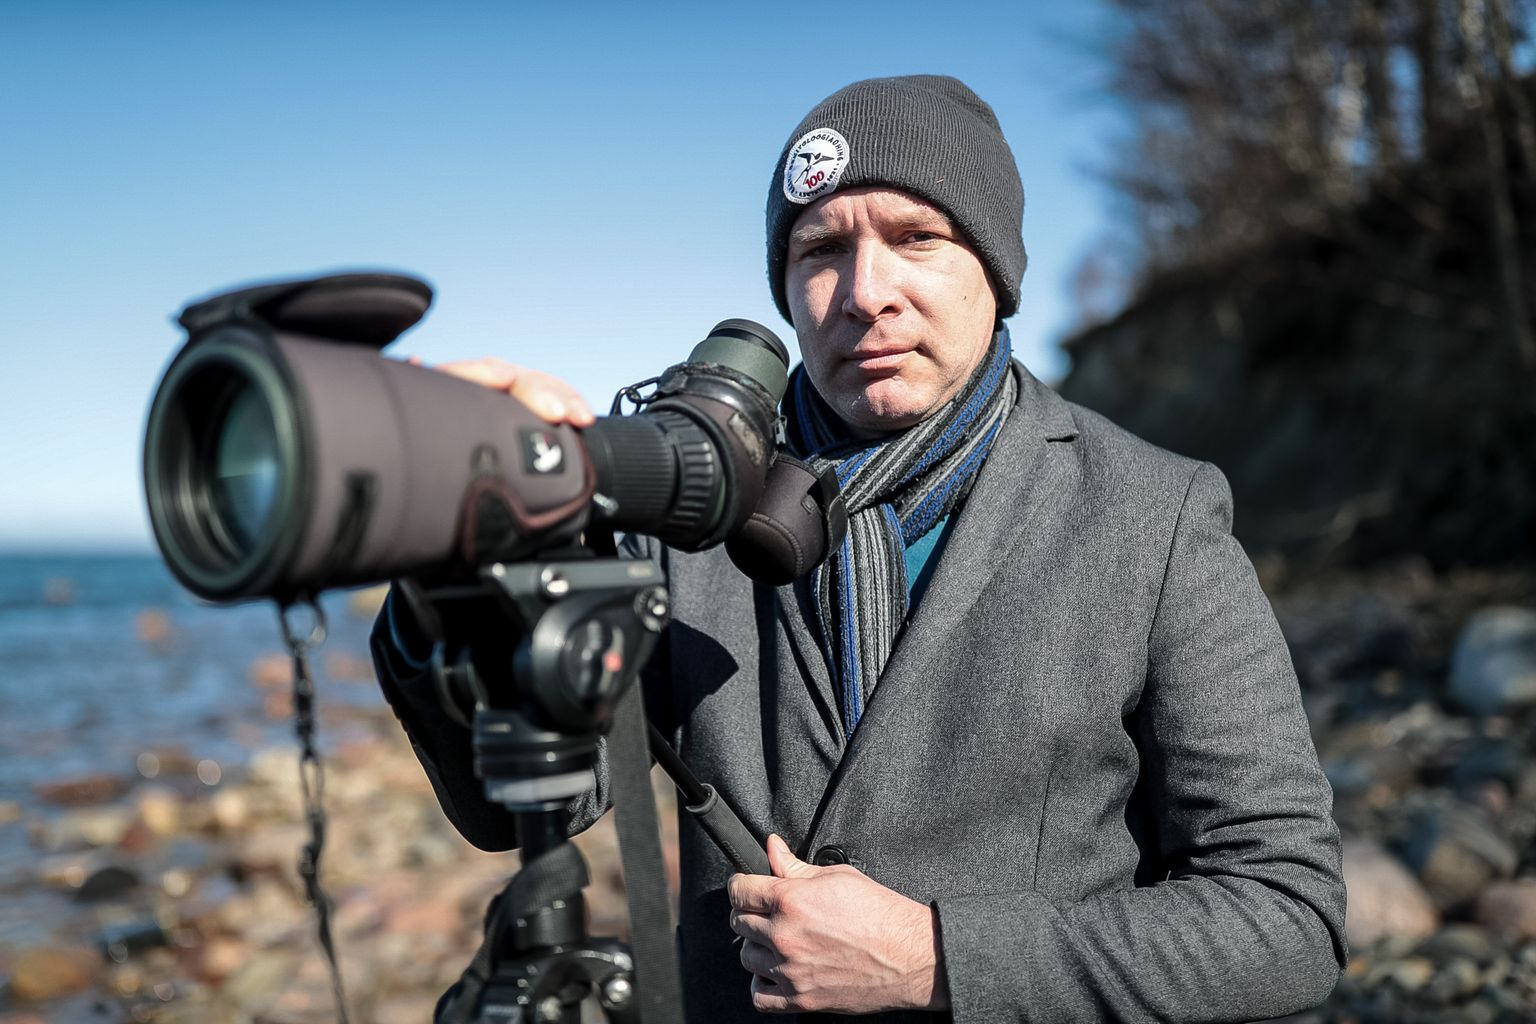 KaarelVõhandu, a bird scientist and head of the Estonian Ornithological Society, confirms that he is not against the gas terminal in principle, but still considers it necessary to assess its environmental impact.